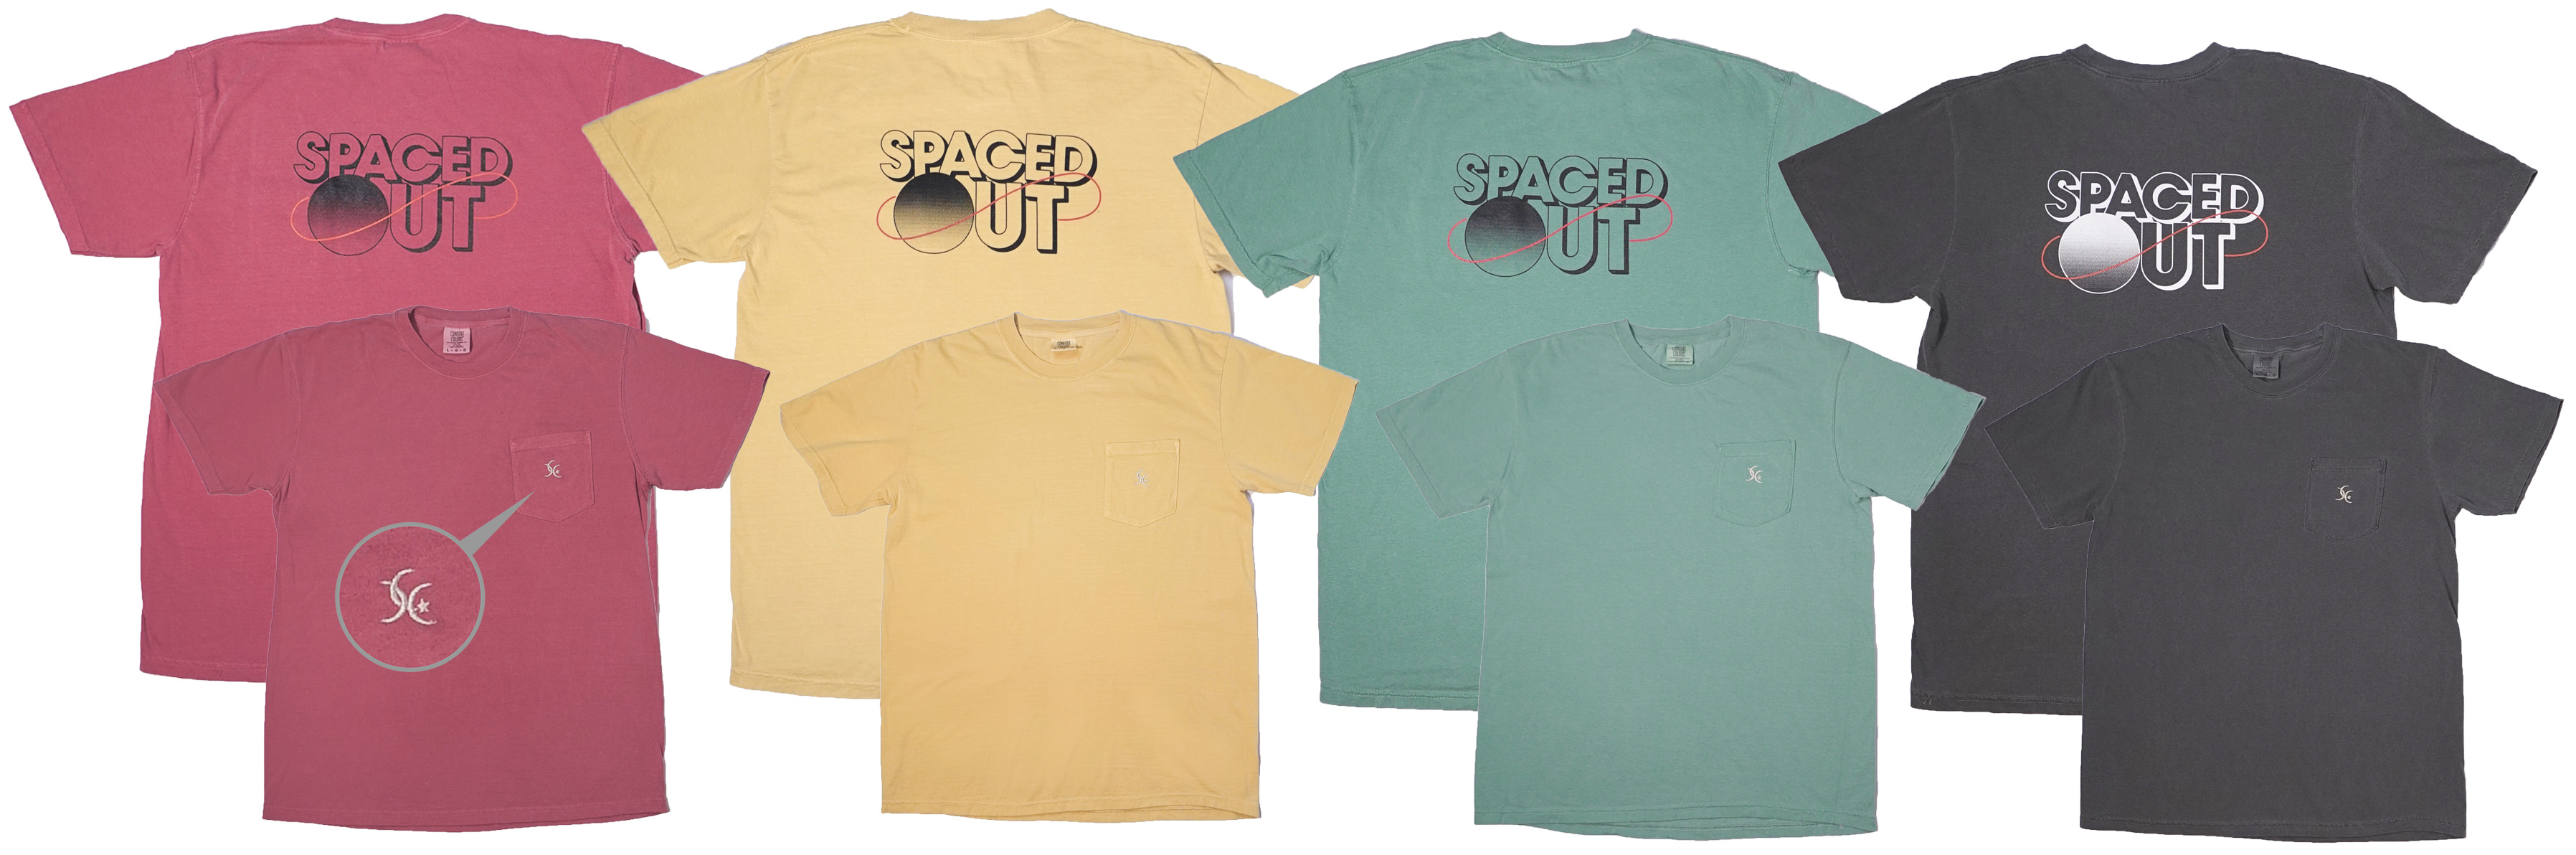 SPACED OUT ポケット T-SHIRT